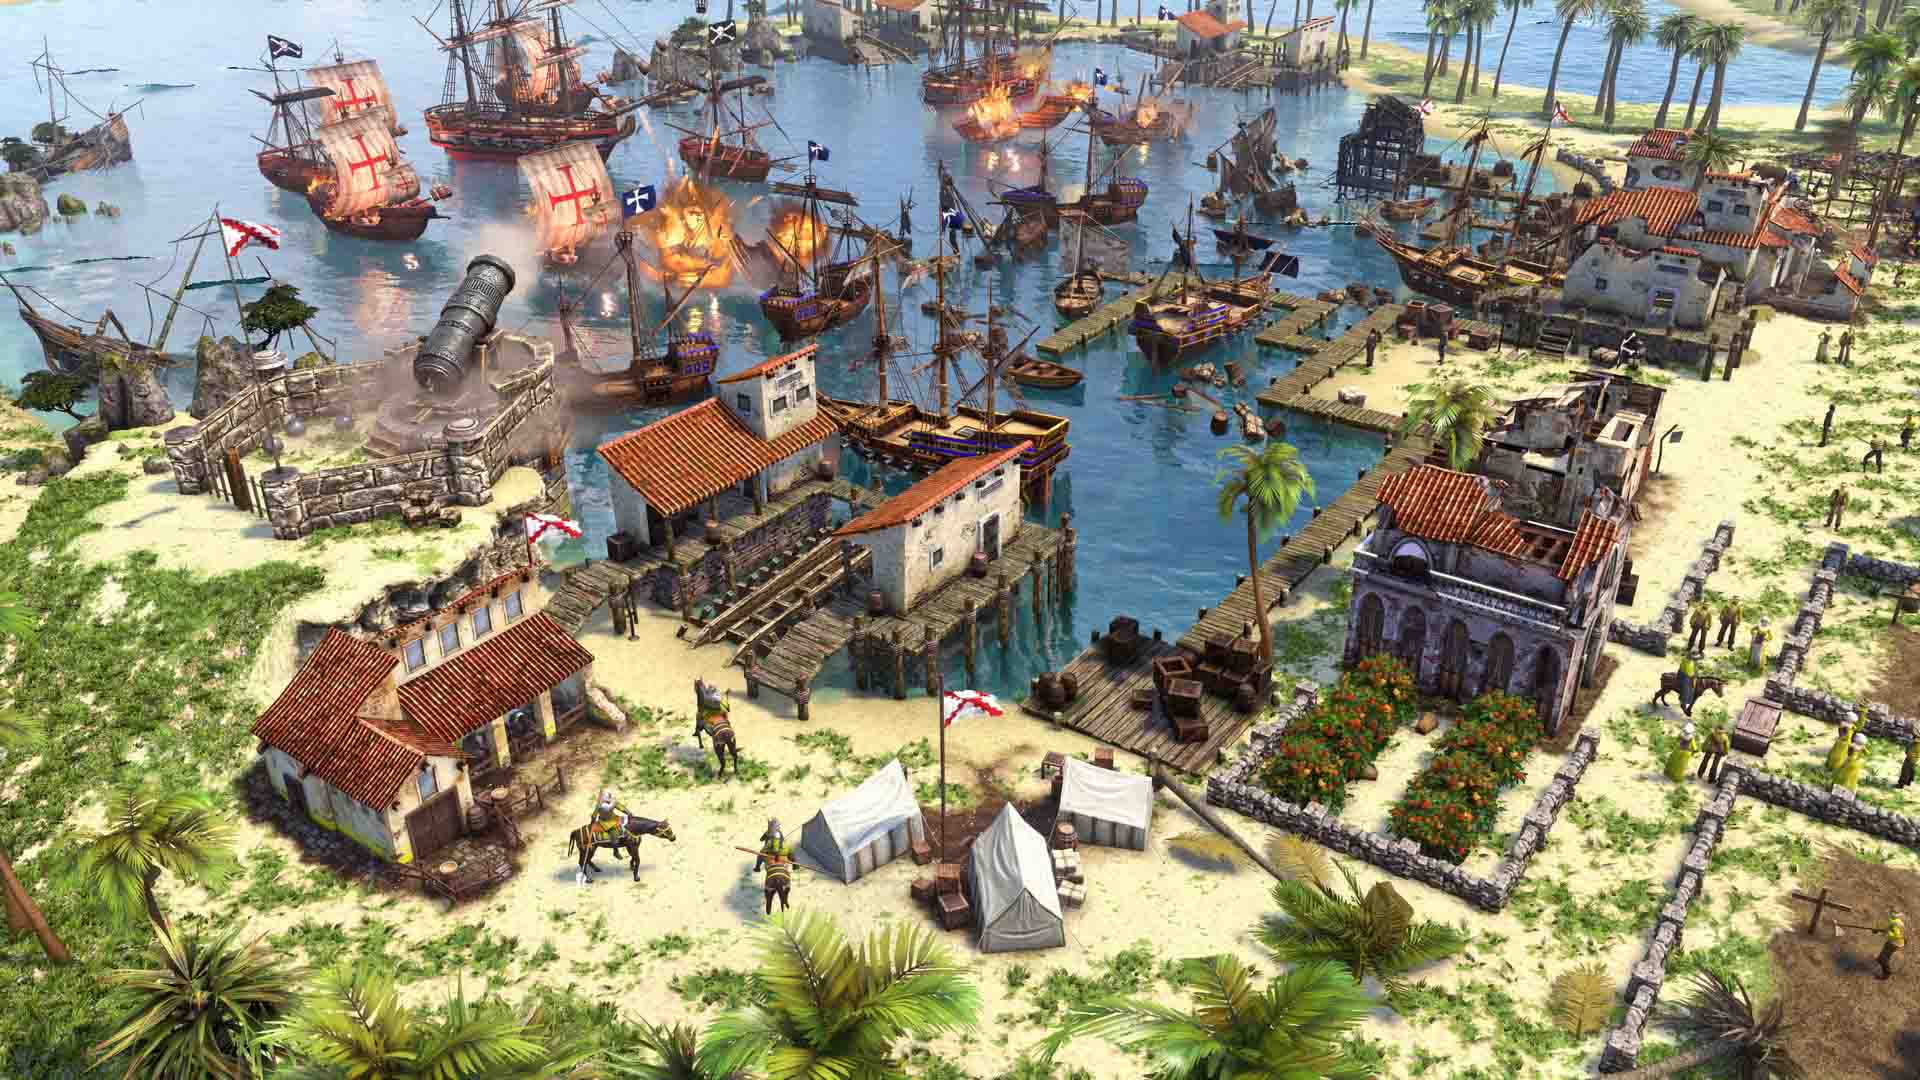 download age of empires 3 definitive edition knights of the mediterranean